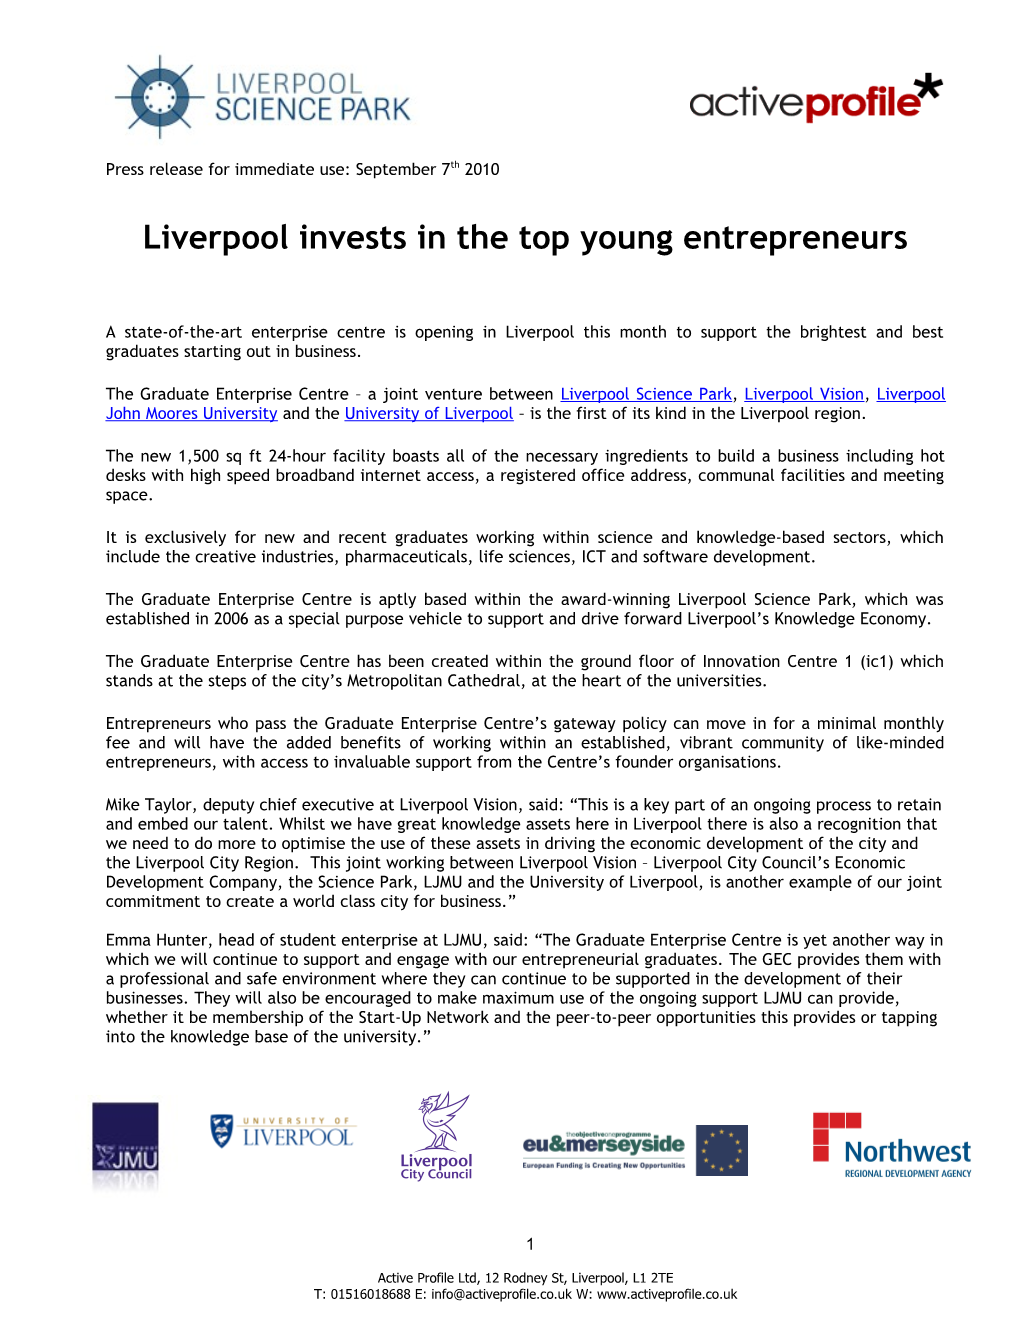 Liverpoolinvestsin the Top Young Entrepreneurs